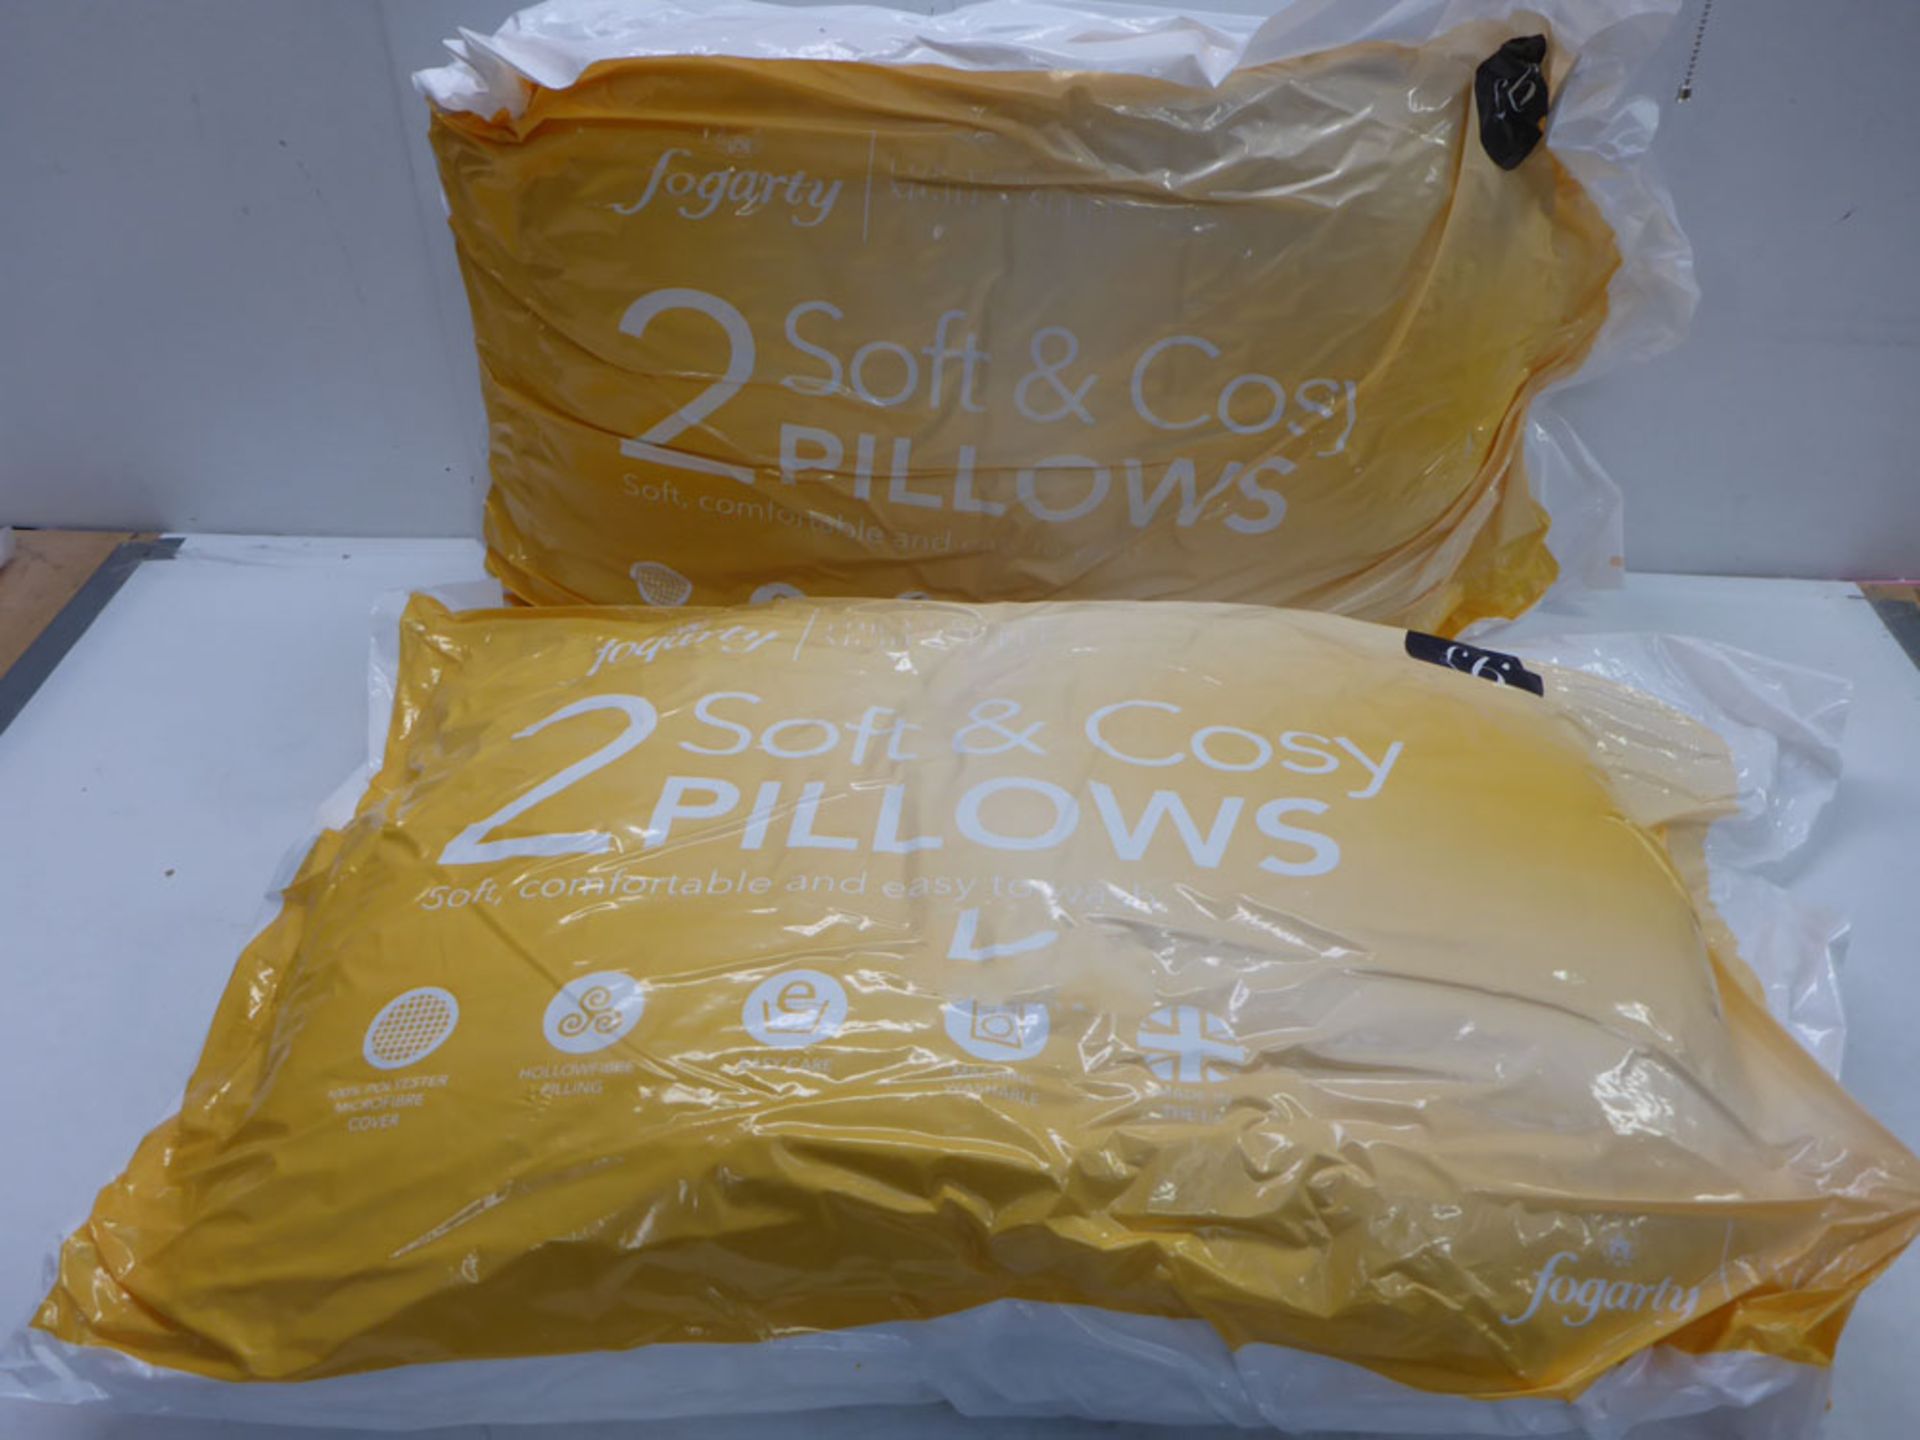 3571 2 packs of 2 Soft & cosy pillows